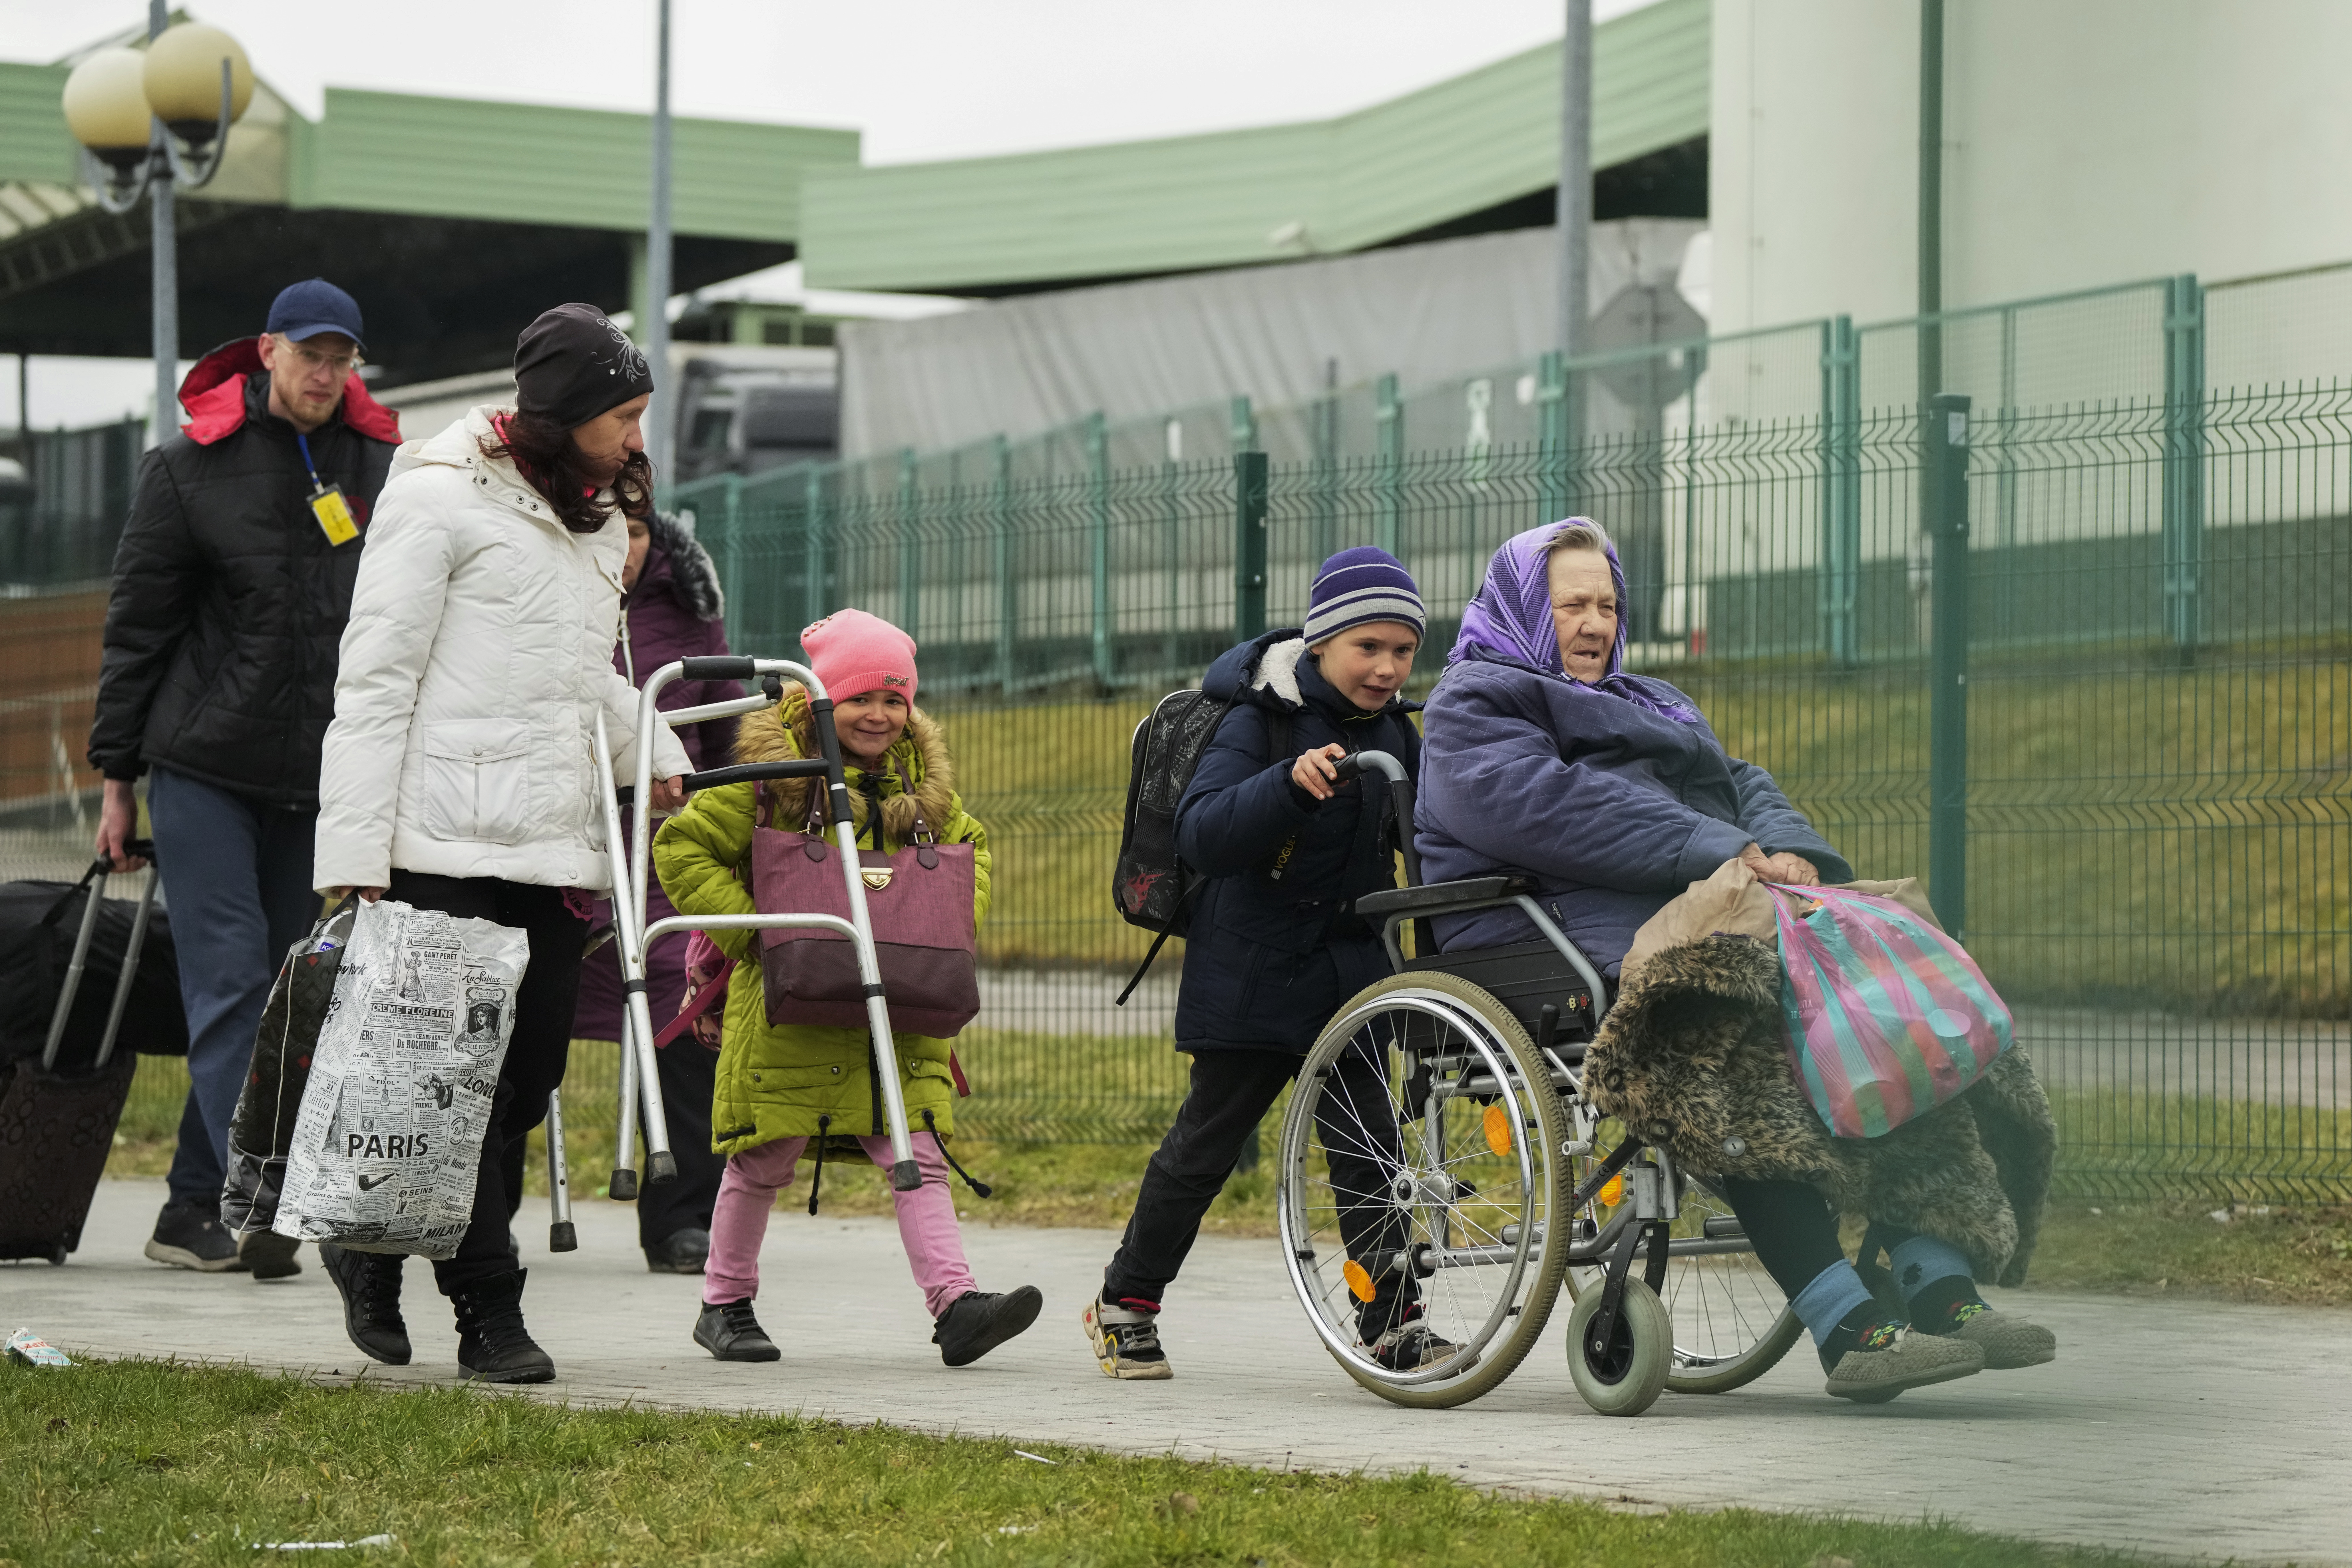 Ukrainian refugees including a woman in a wheelchair being pushed by a little boy, flee Ukraine into Poland